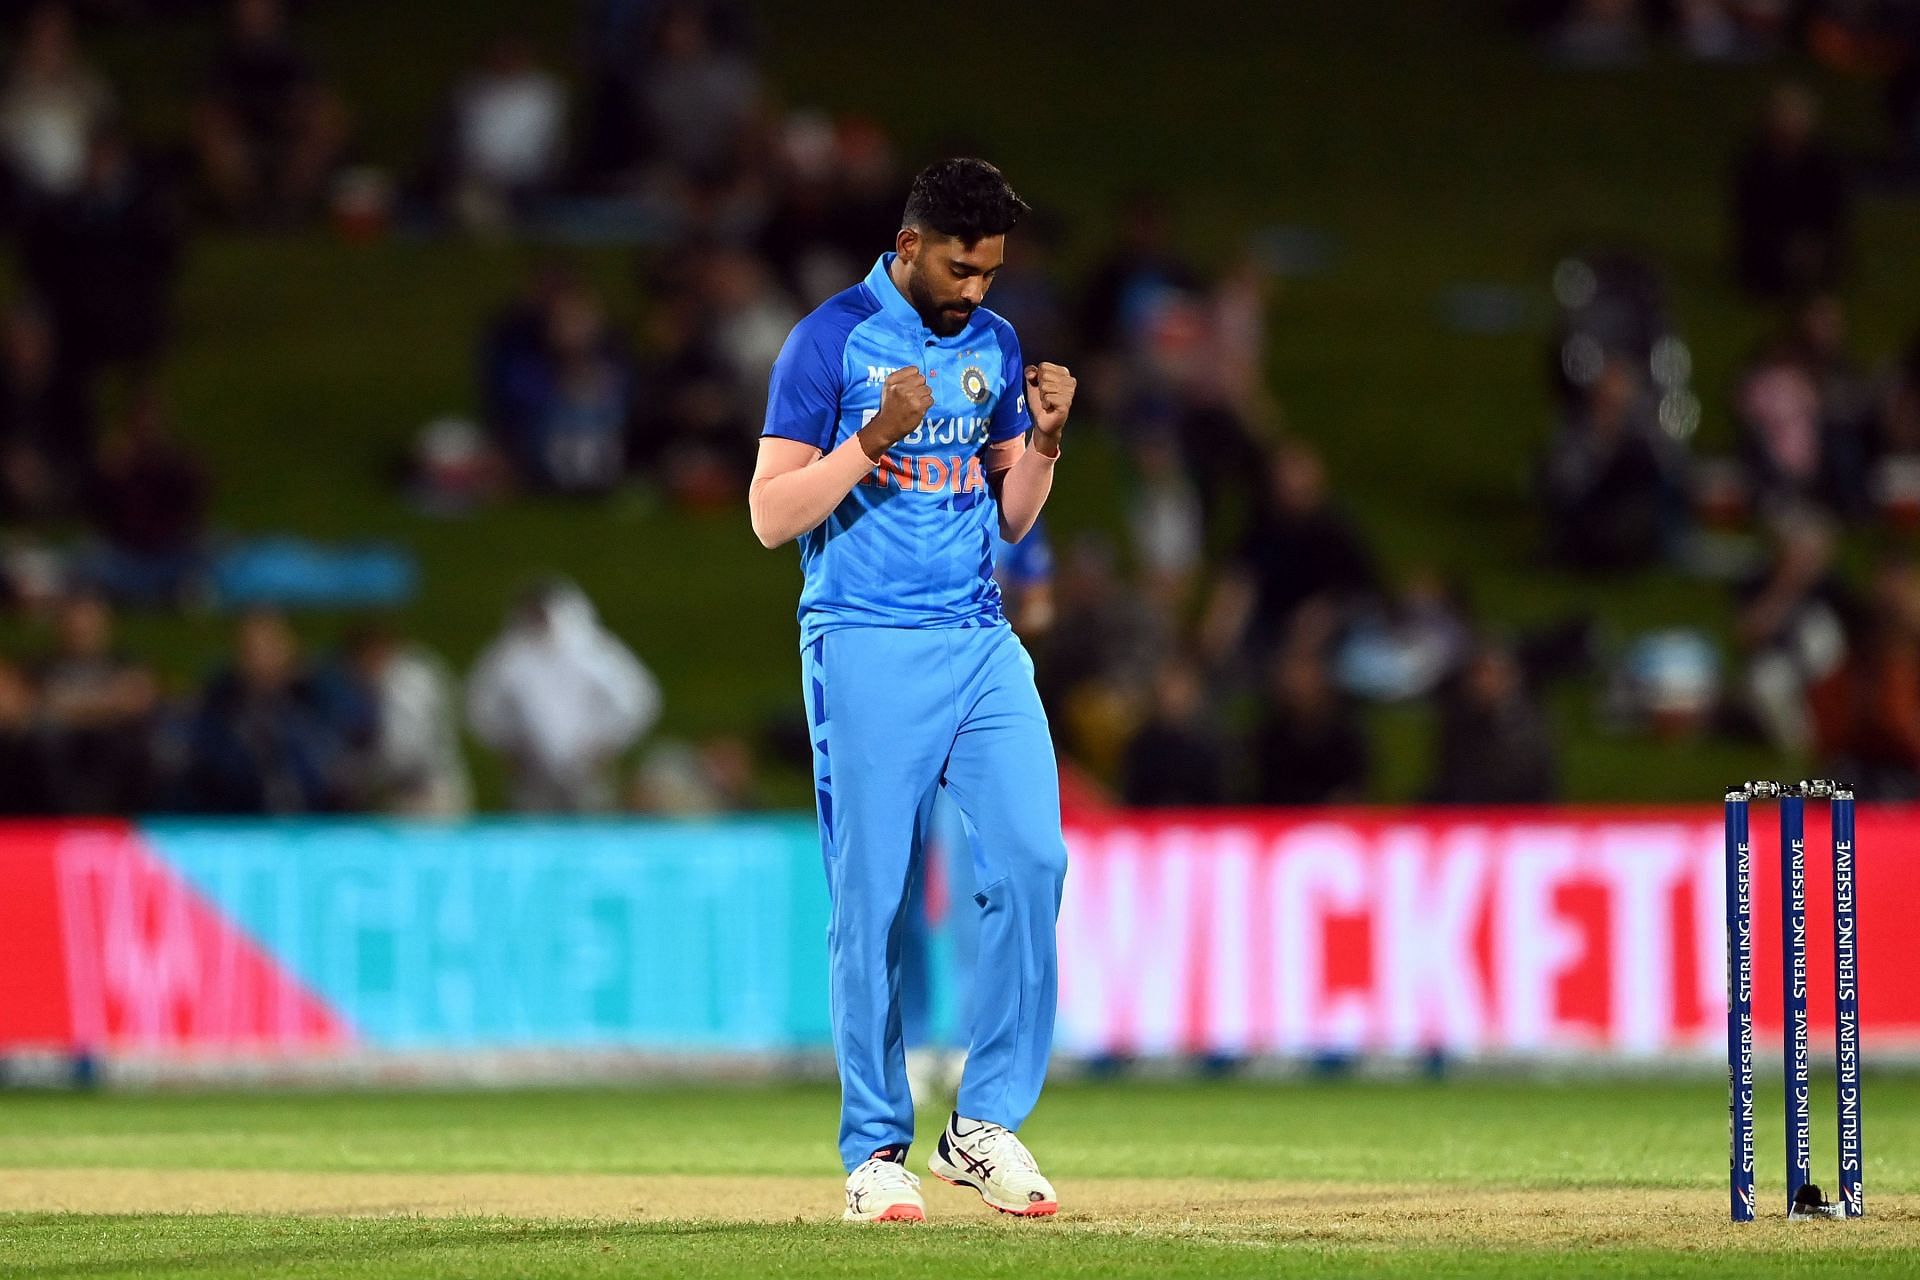 Mohammed Siraj was the Player of the Match in the third T20I between India and New Zealand. [P/C: BCCI]